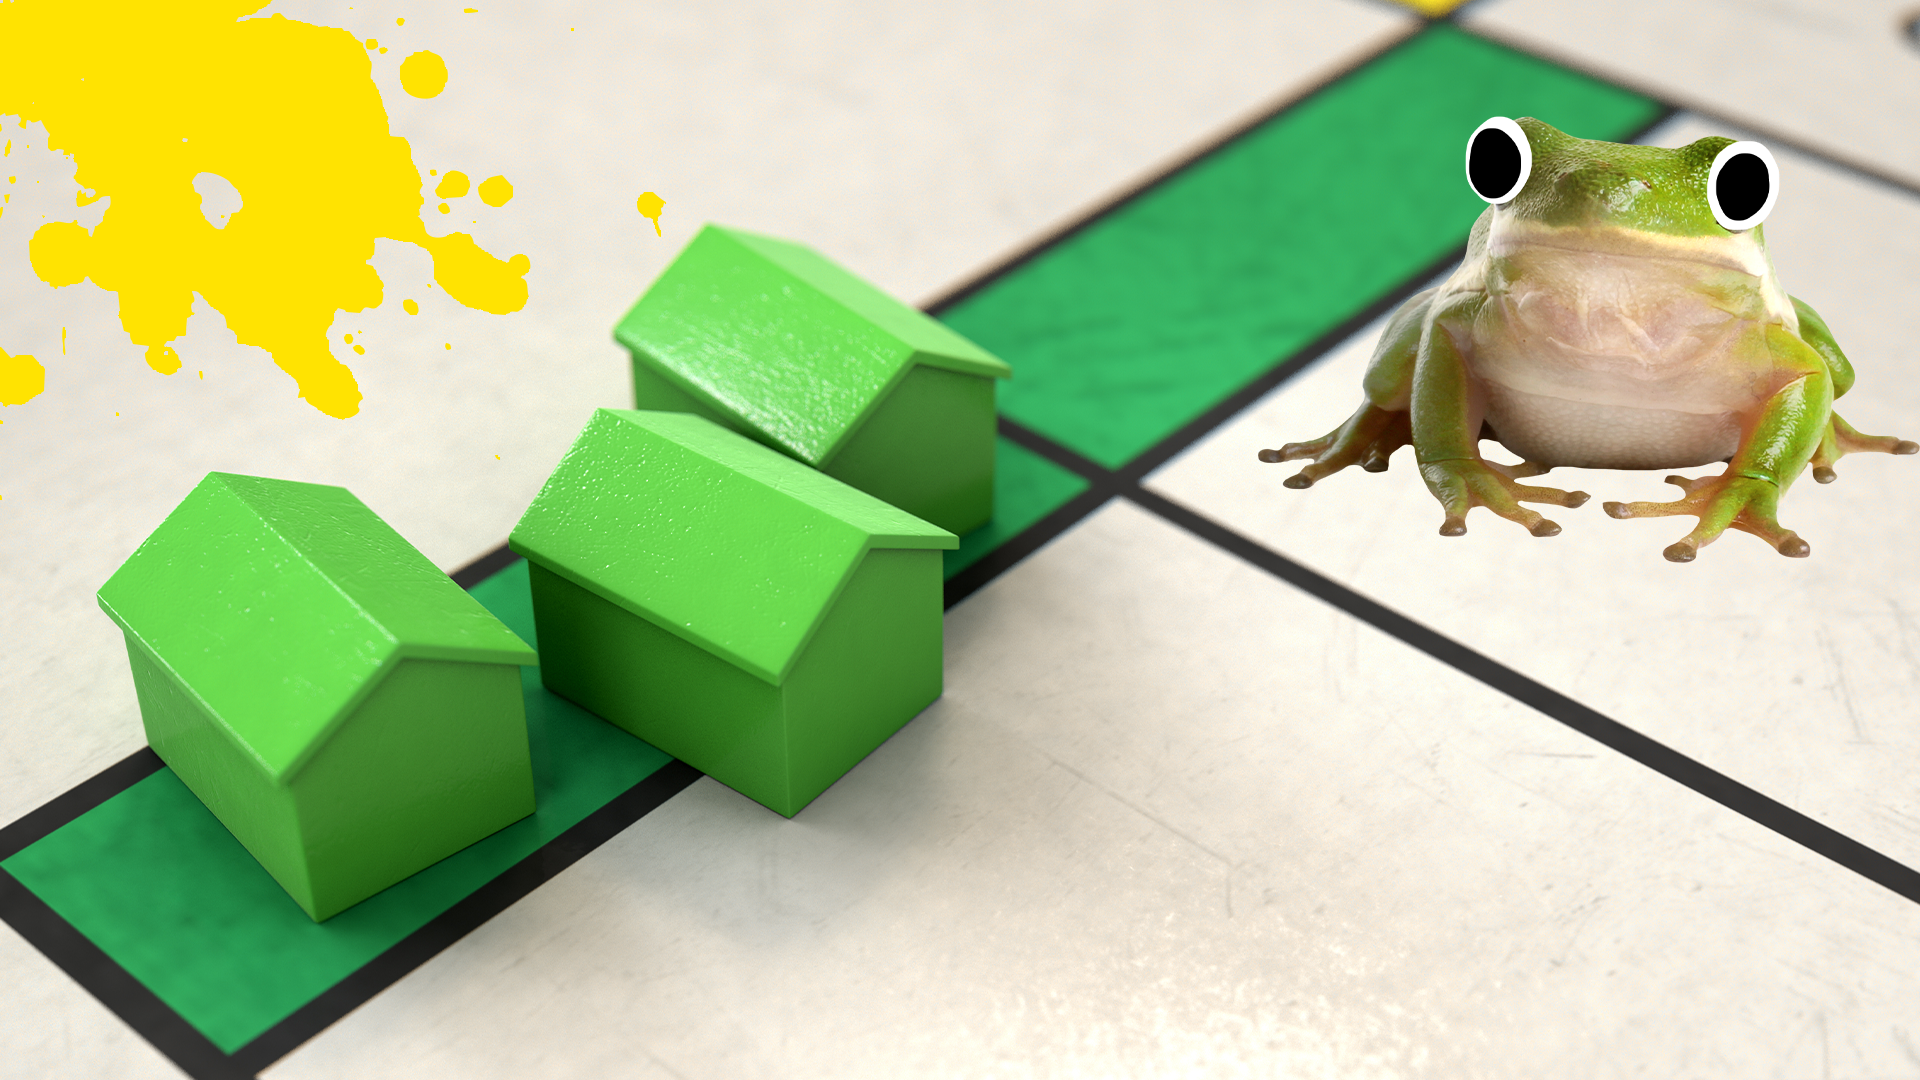 Boardgame with splat and derpy frog